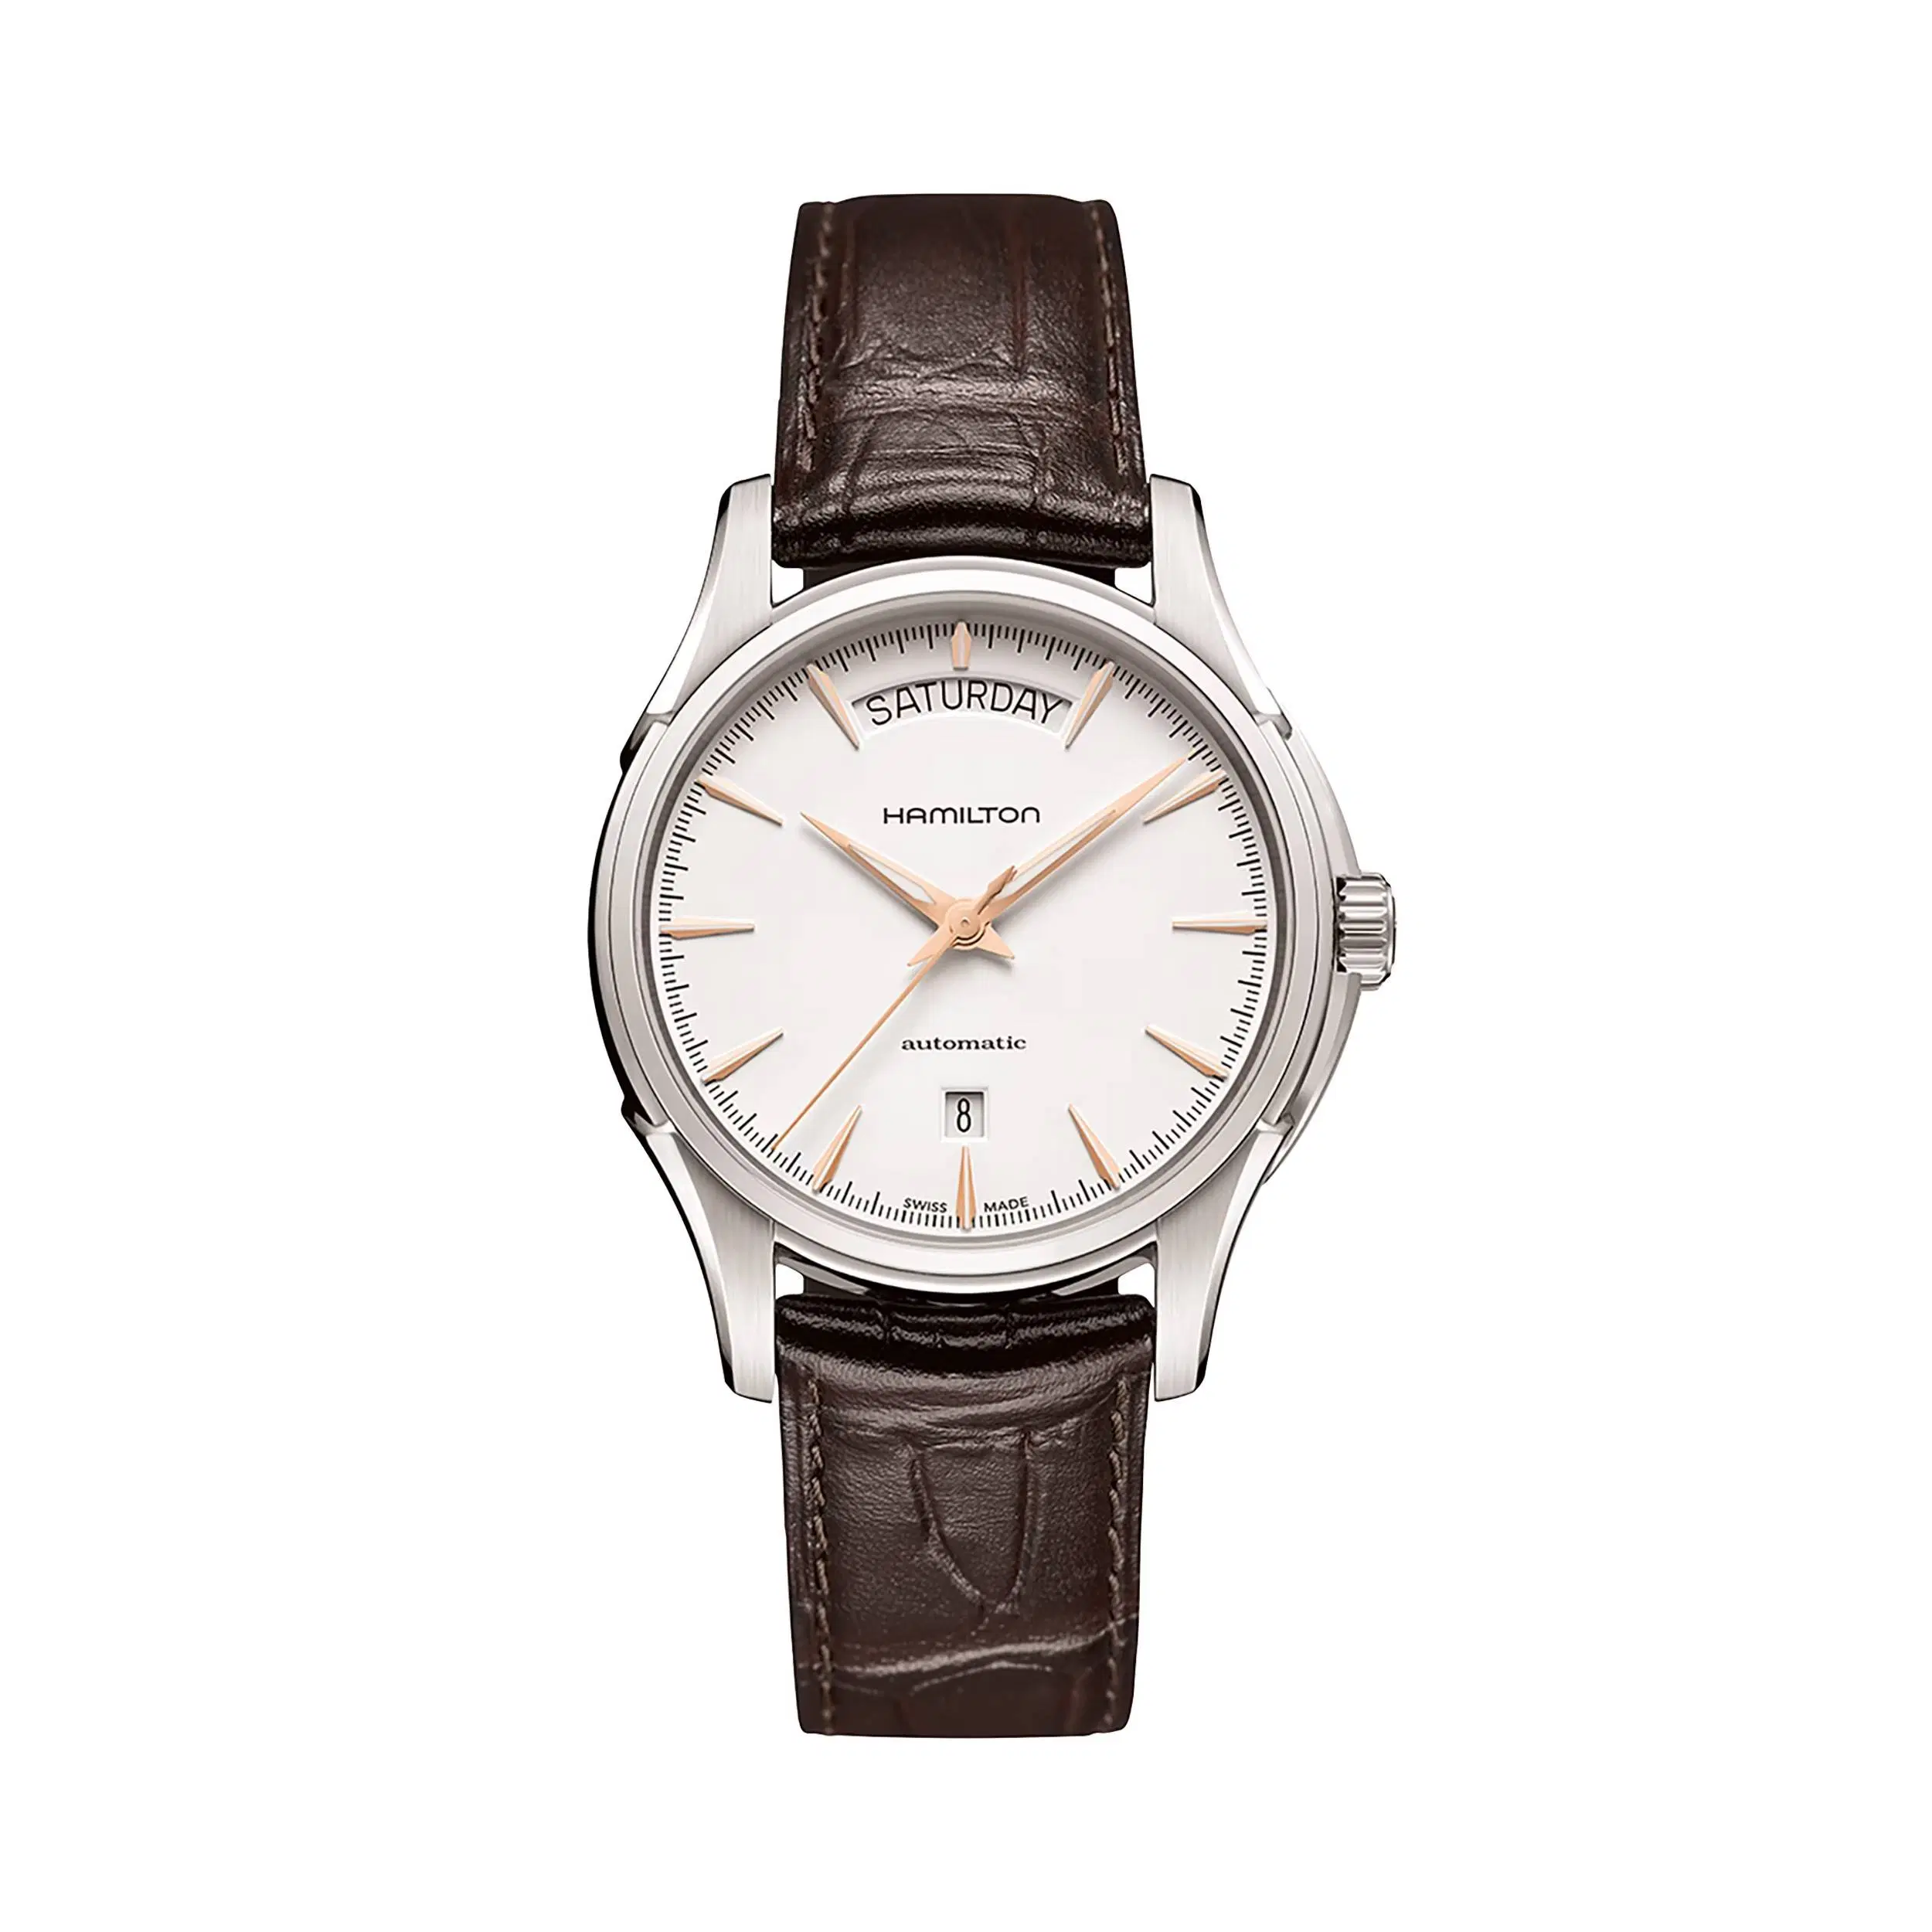 Hamilton Jazzmaster Day Date Auto with Leather Strap